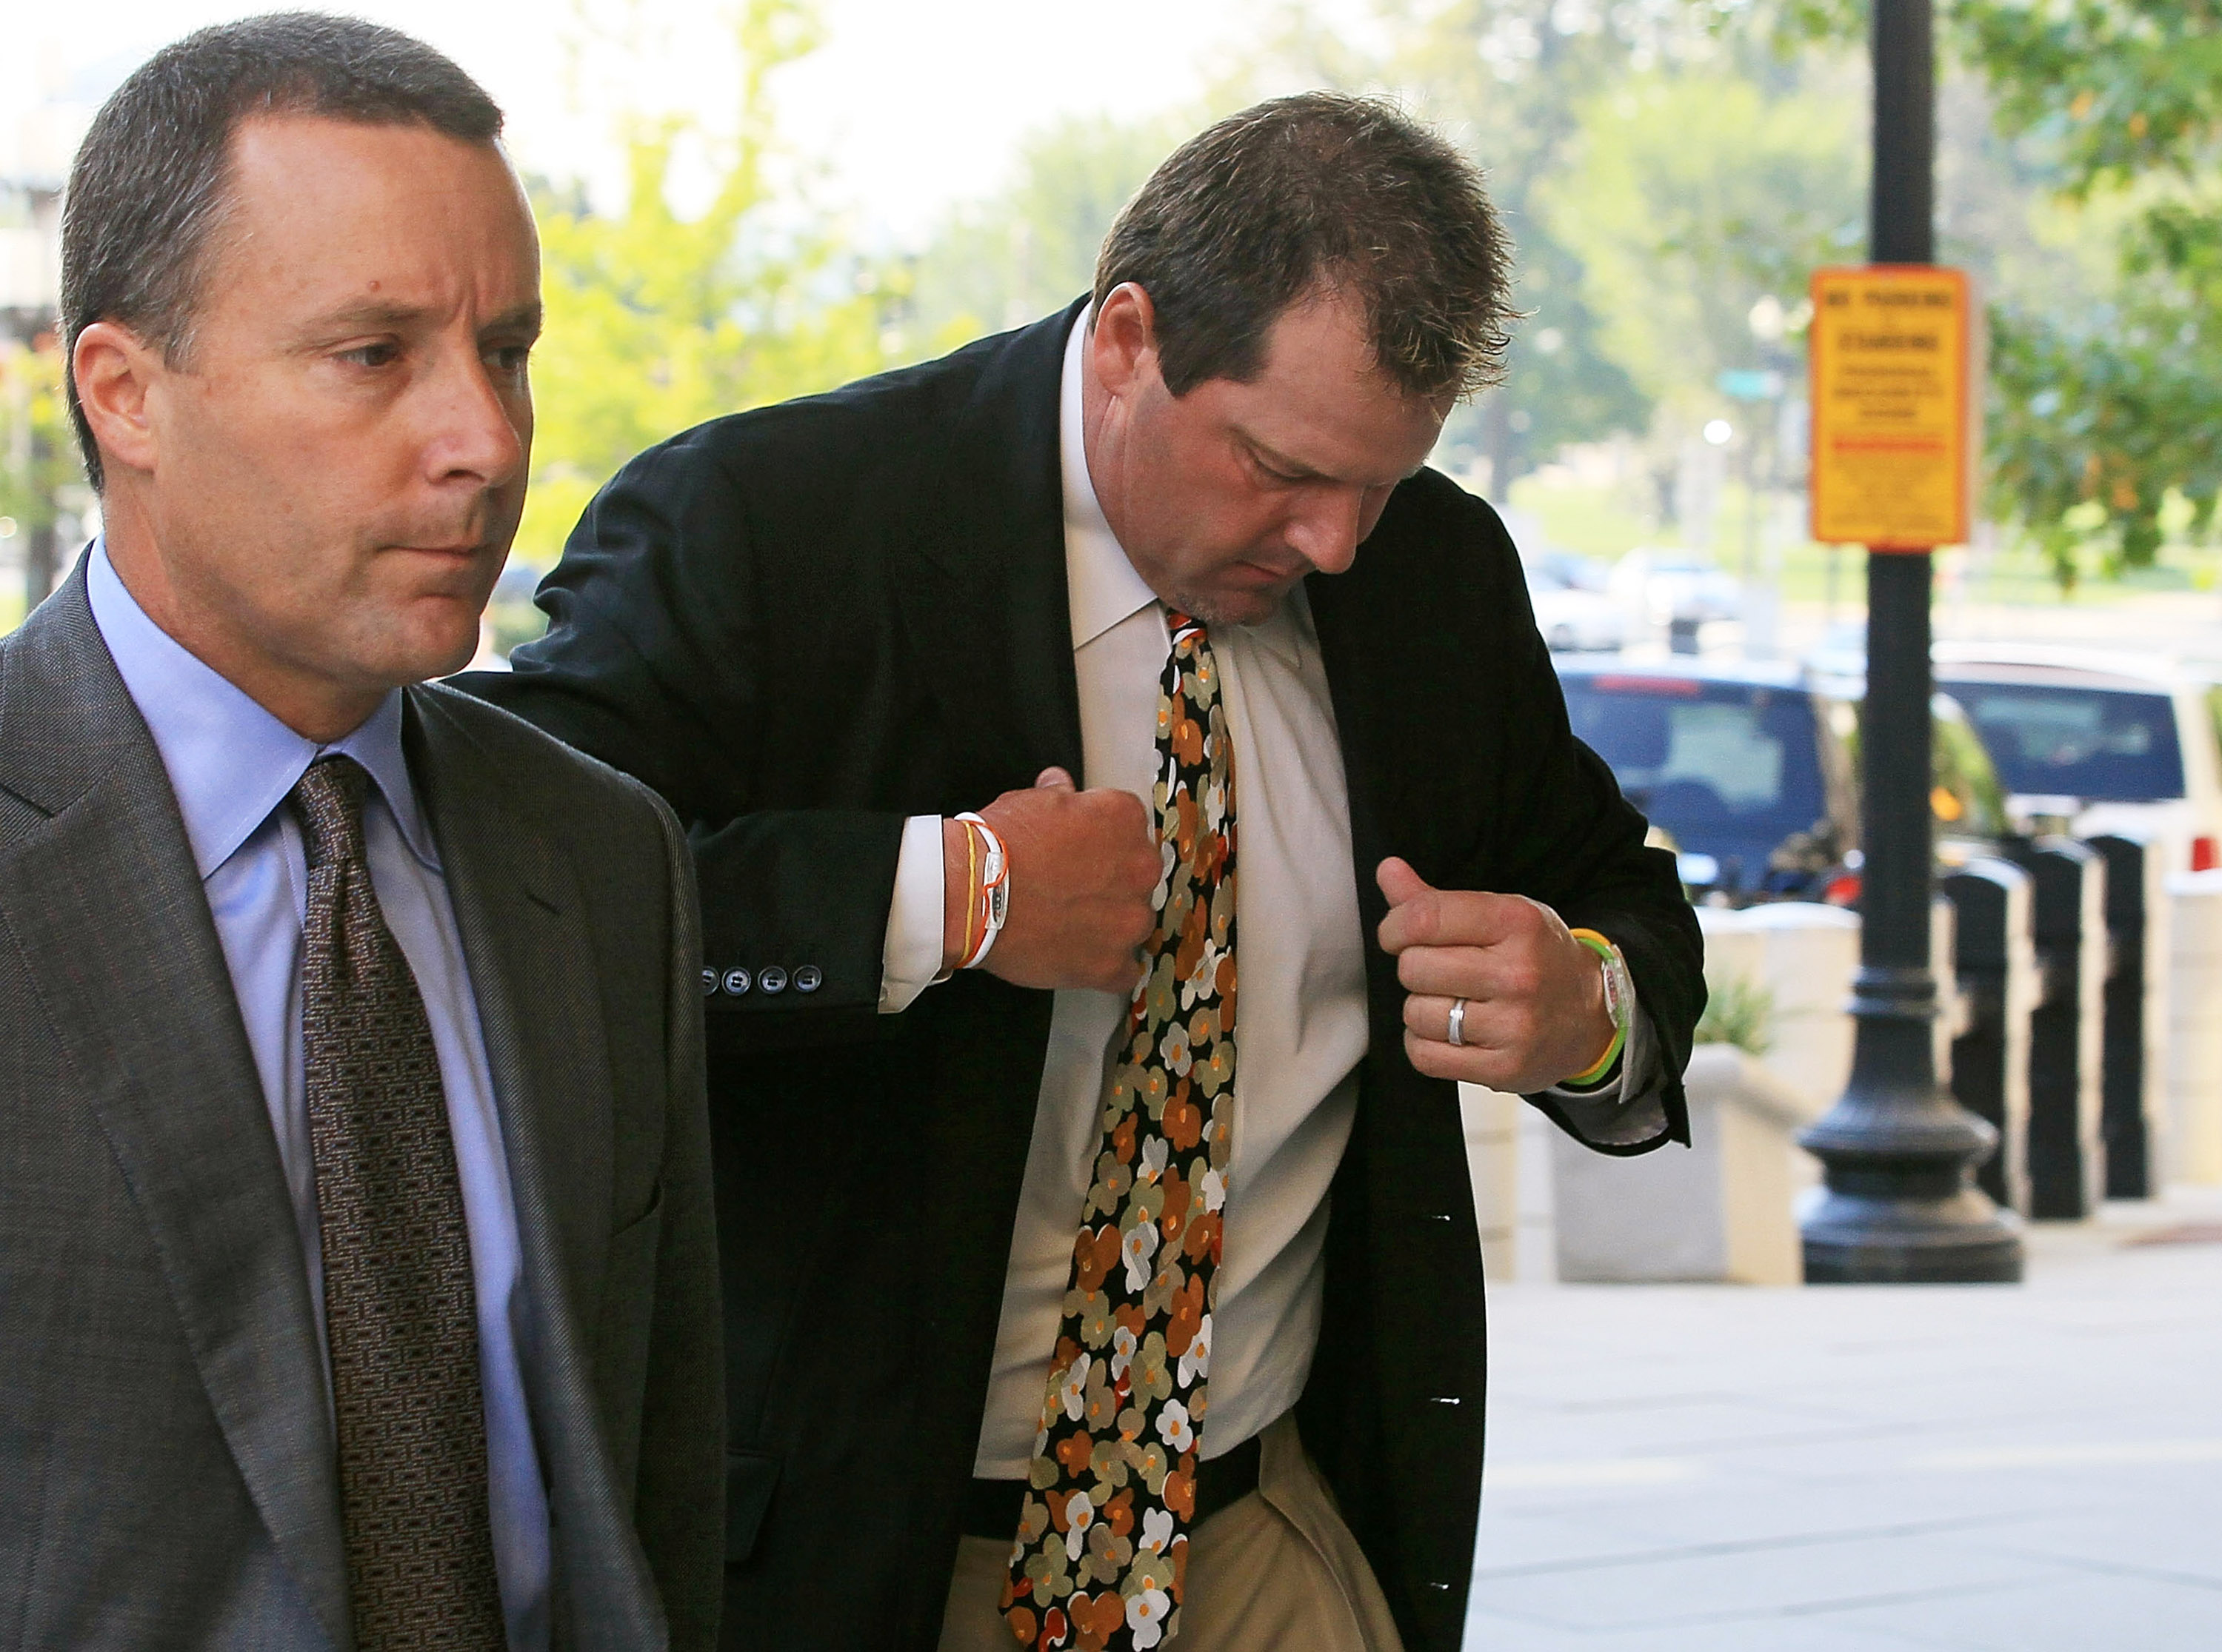 Clemens pled not guilty to the Congressional charges levied against him today.